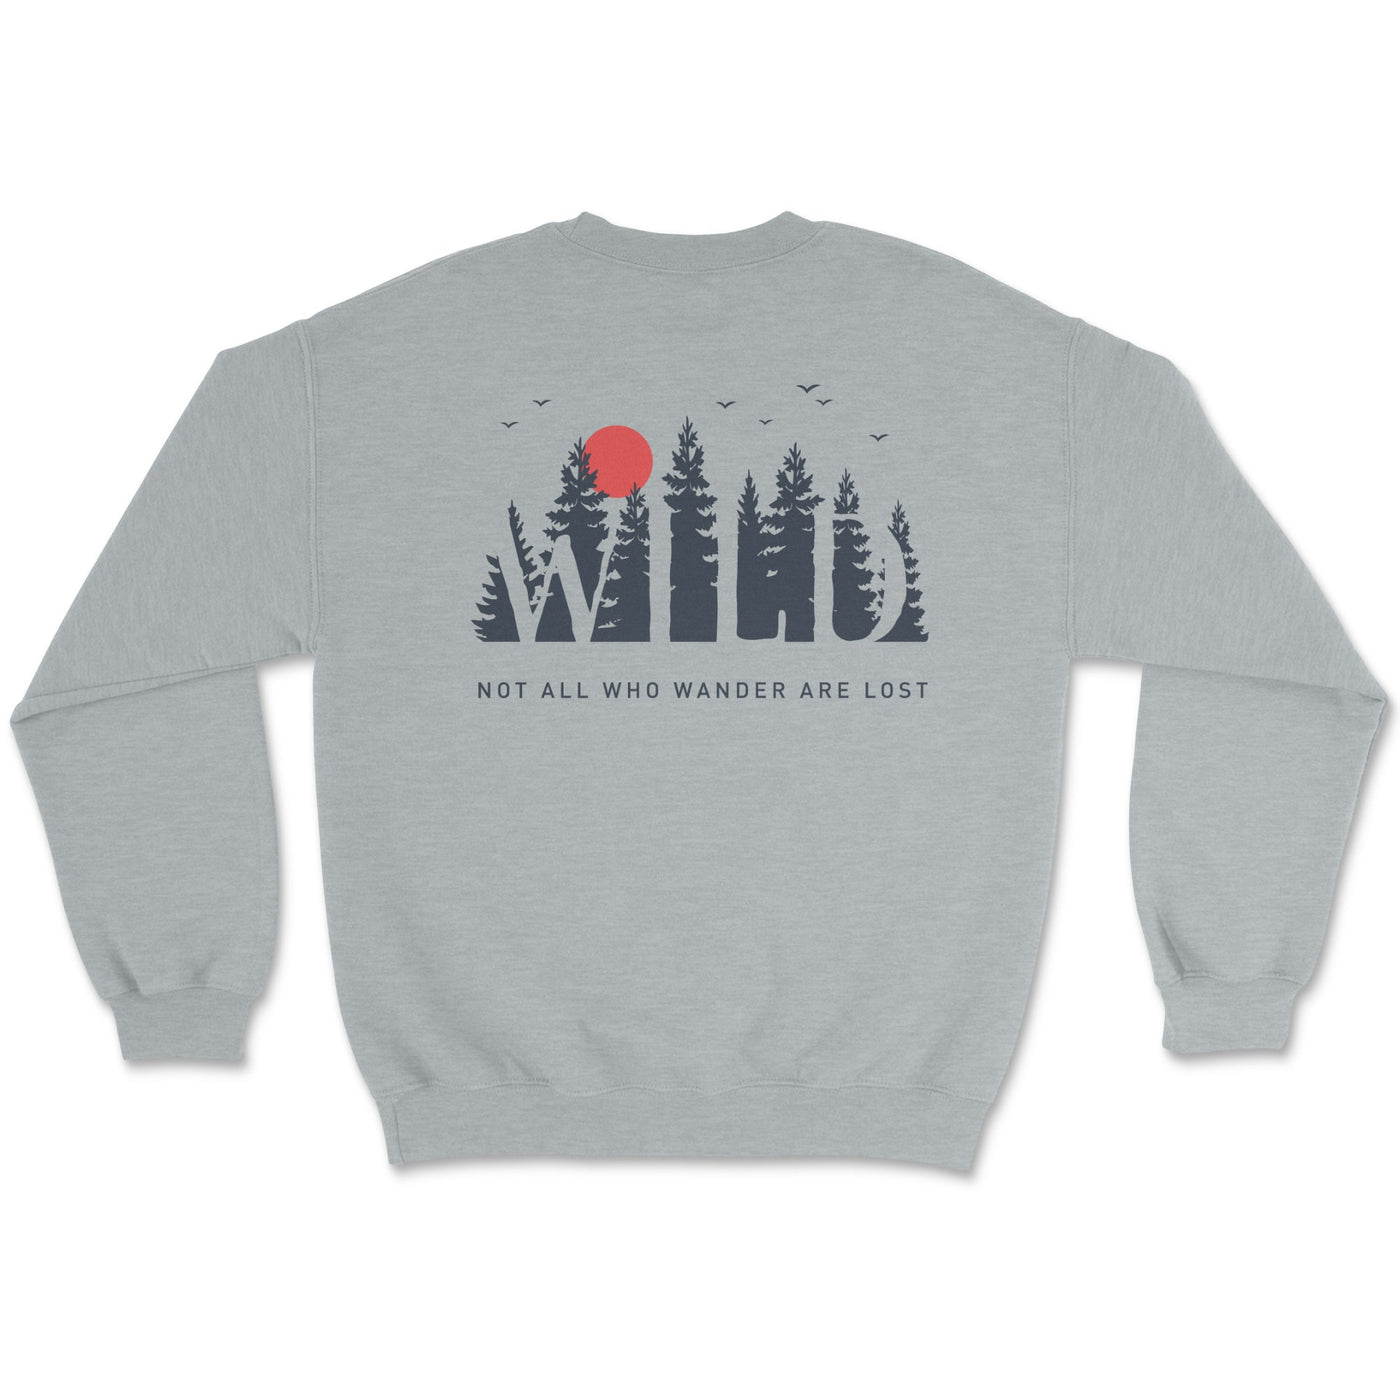 Not All Who Wander Are Lost Sweatshirt - Goats Trail Off-Road Apparel Company